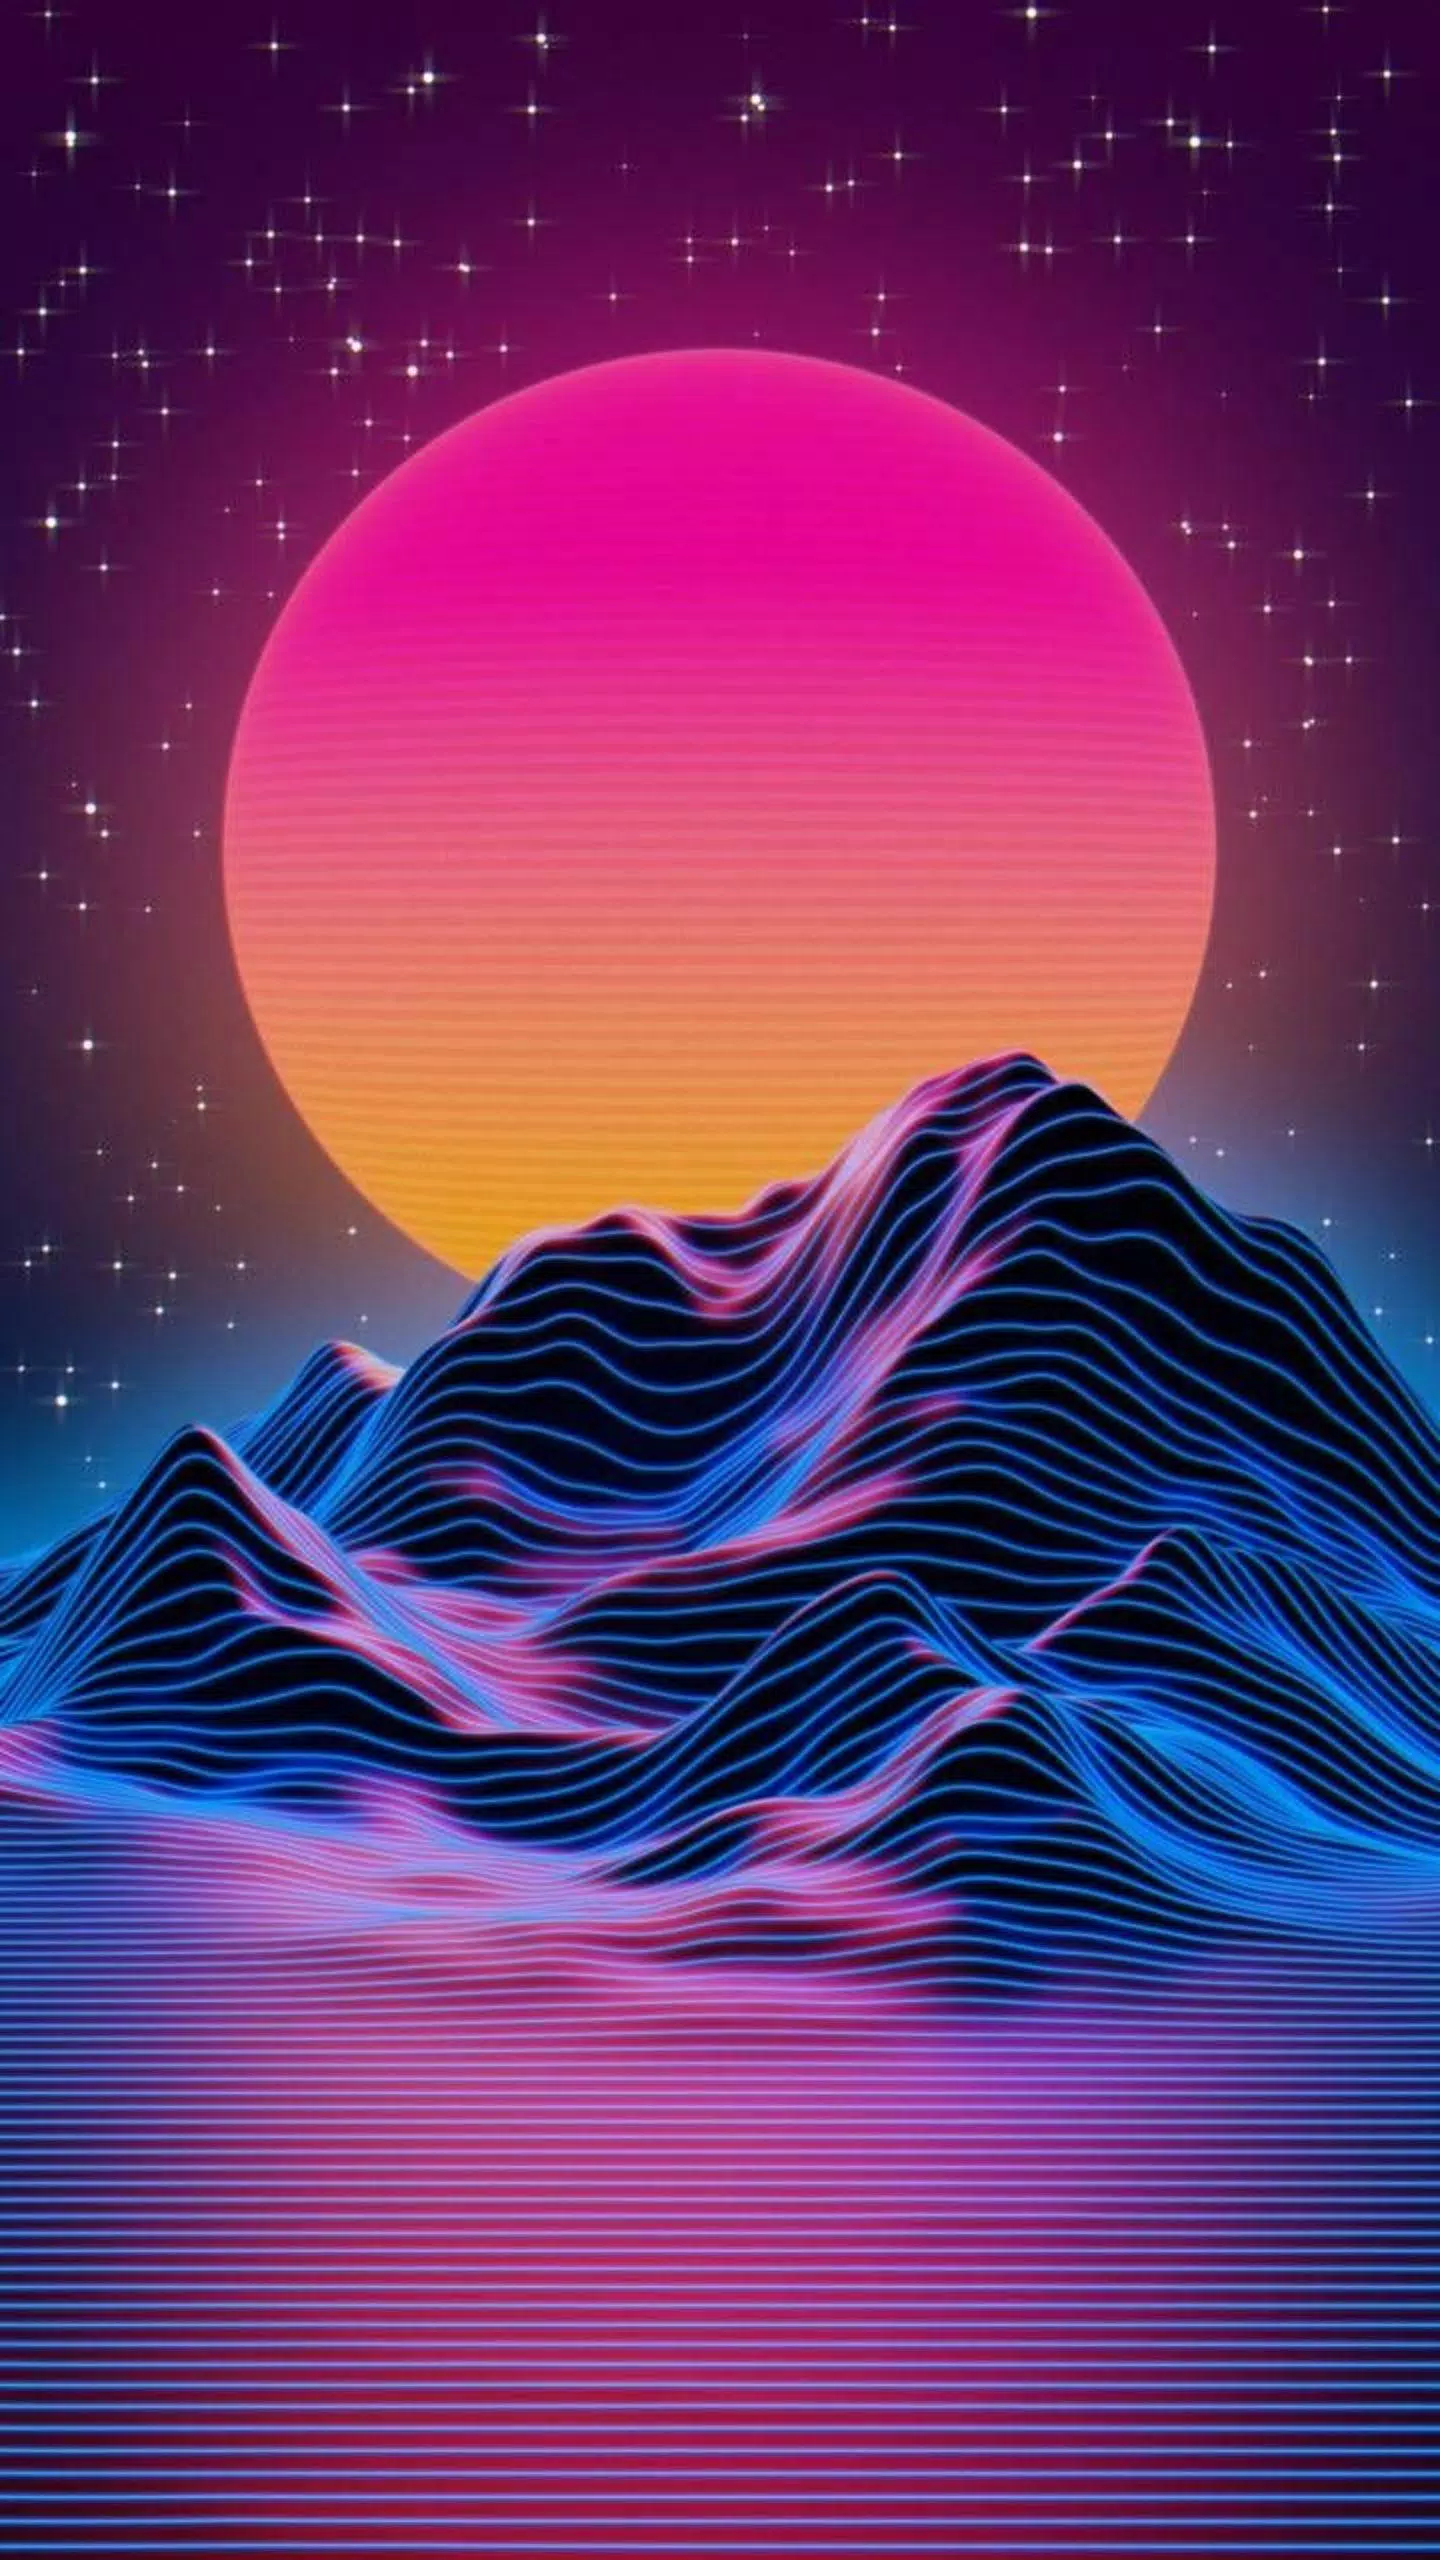 Vaporwave wallpapers apk for android download